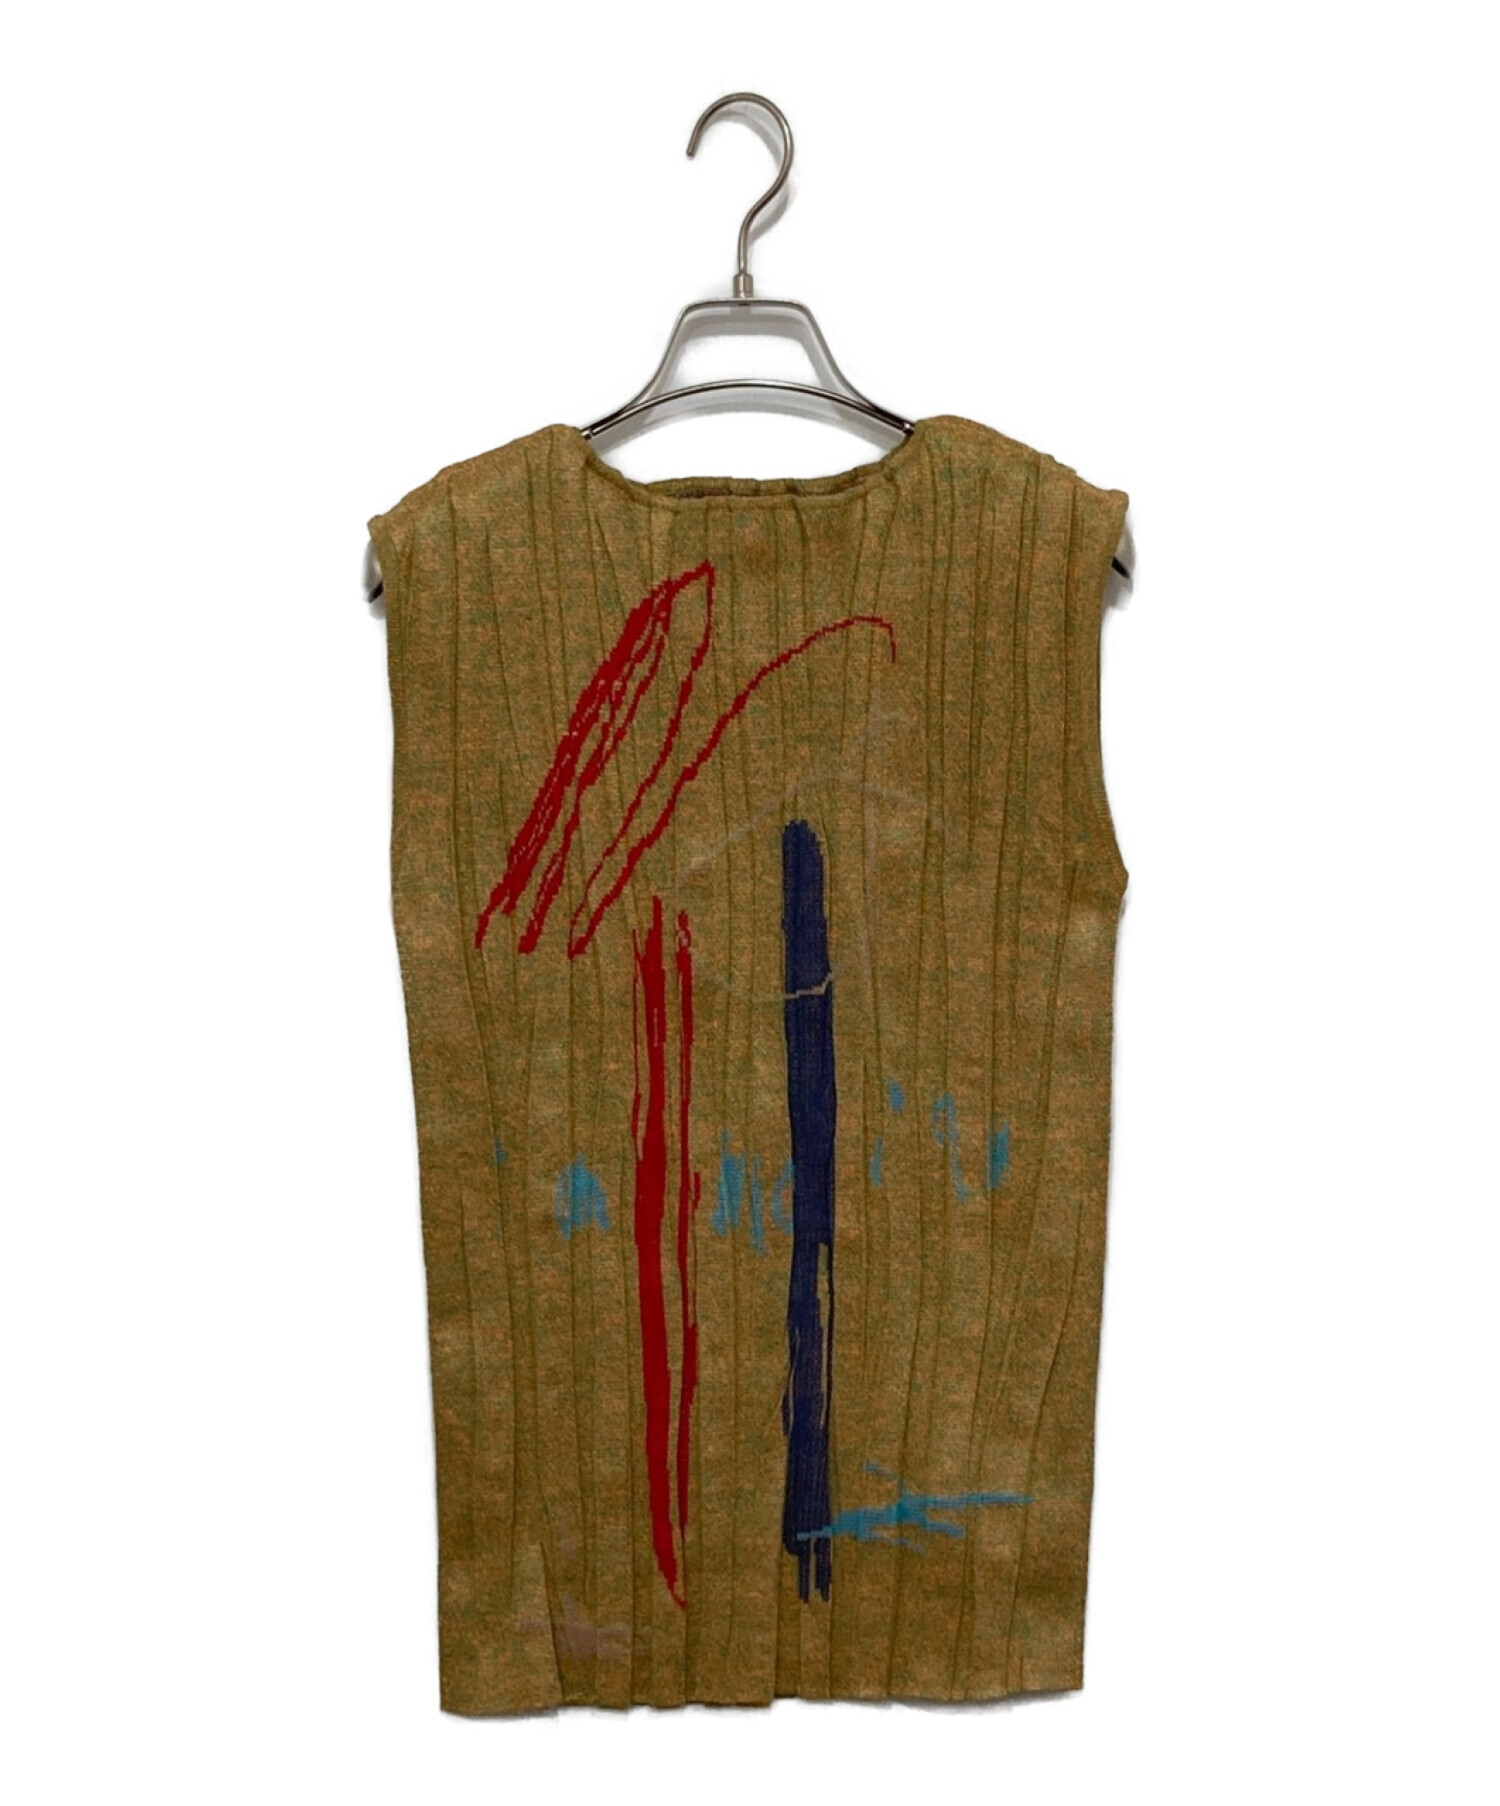 shrinked drawing tank top